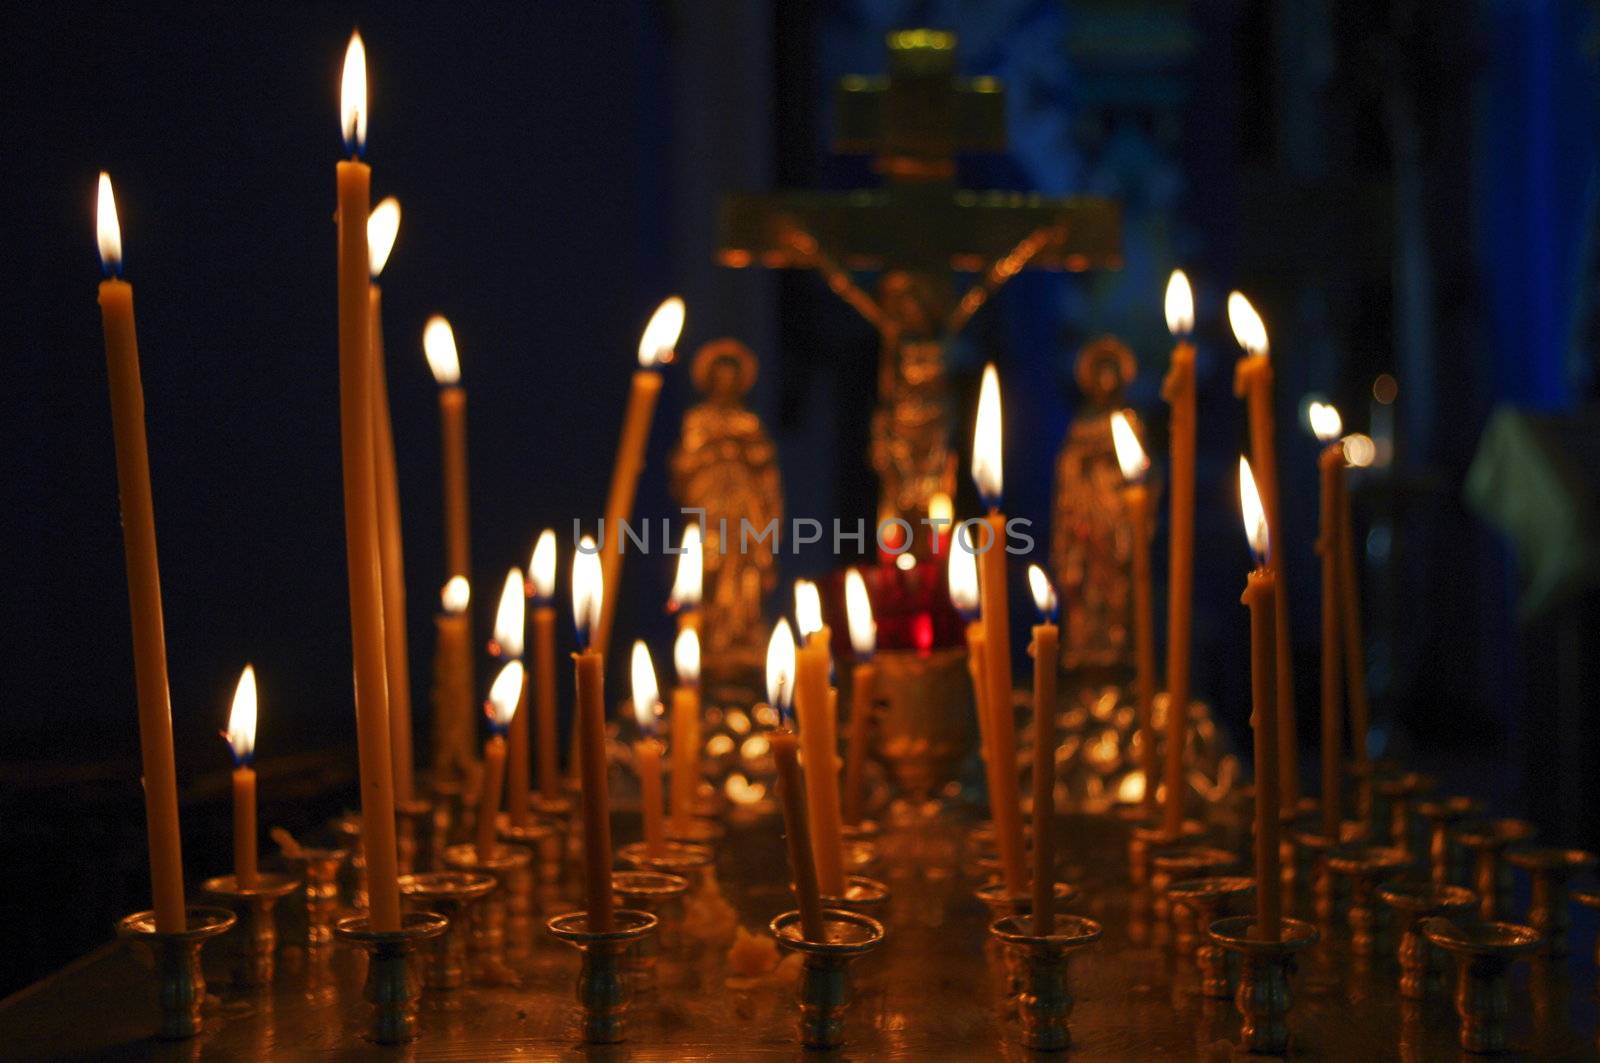 Candles in the Church by Stoyanov